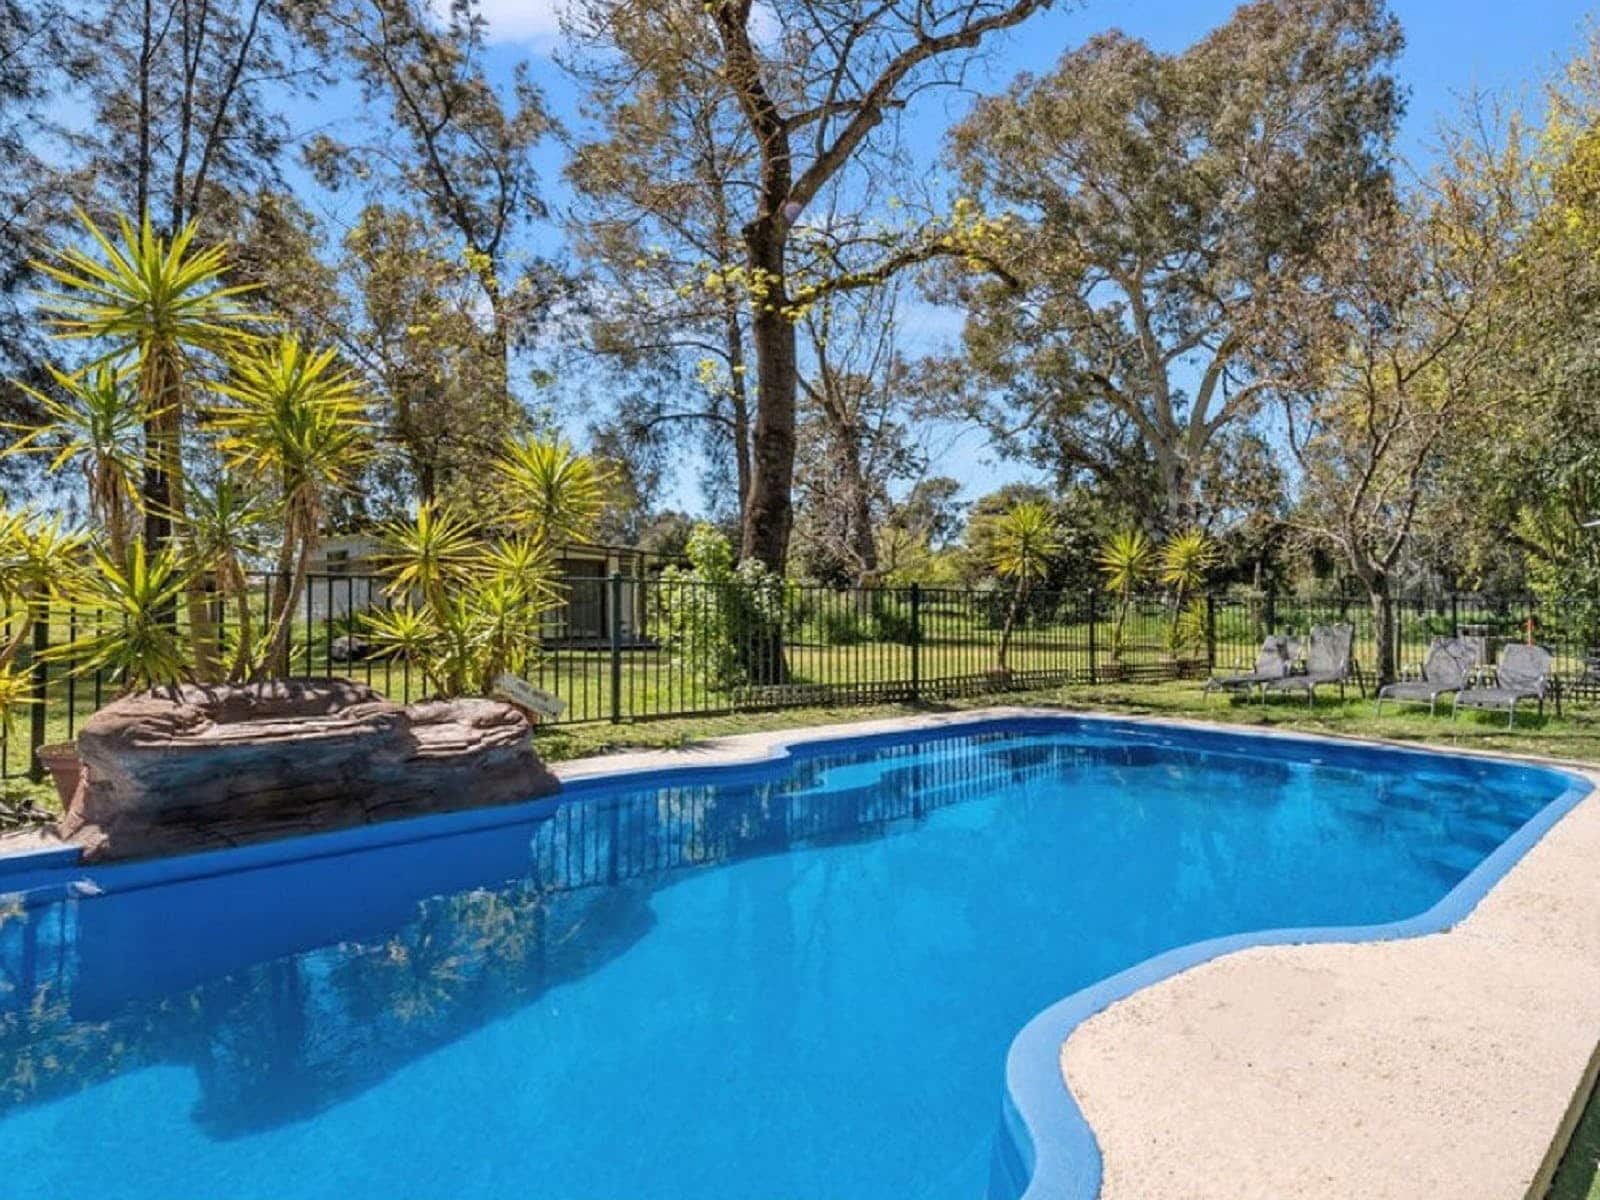 Pool on site with a gate around, lounge chairs and trees